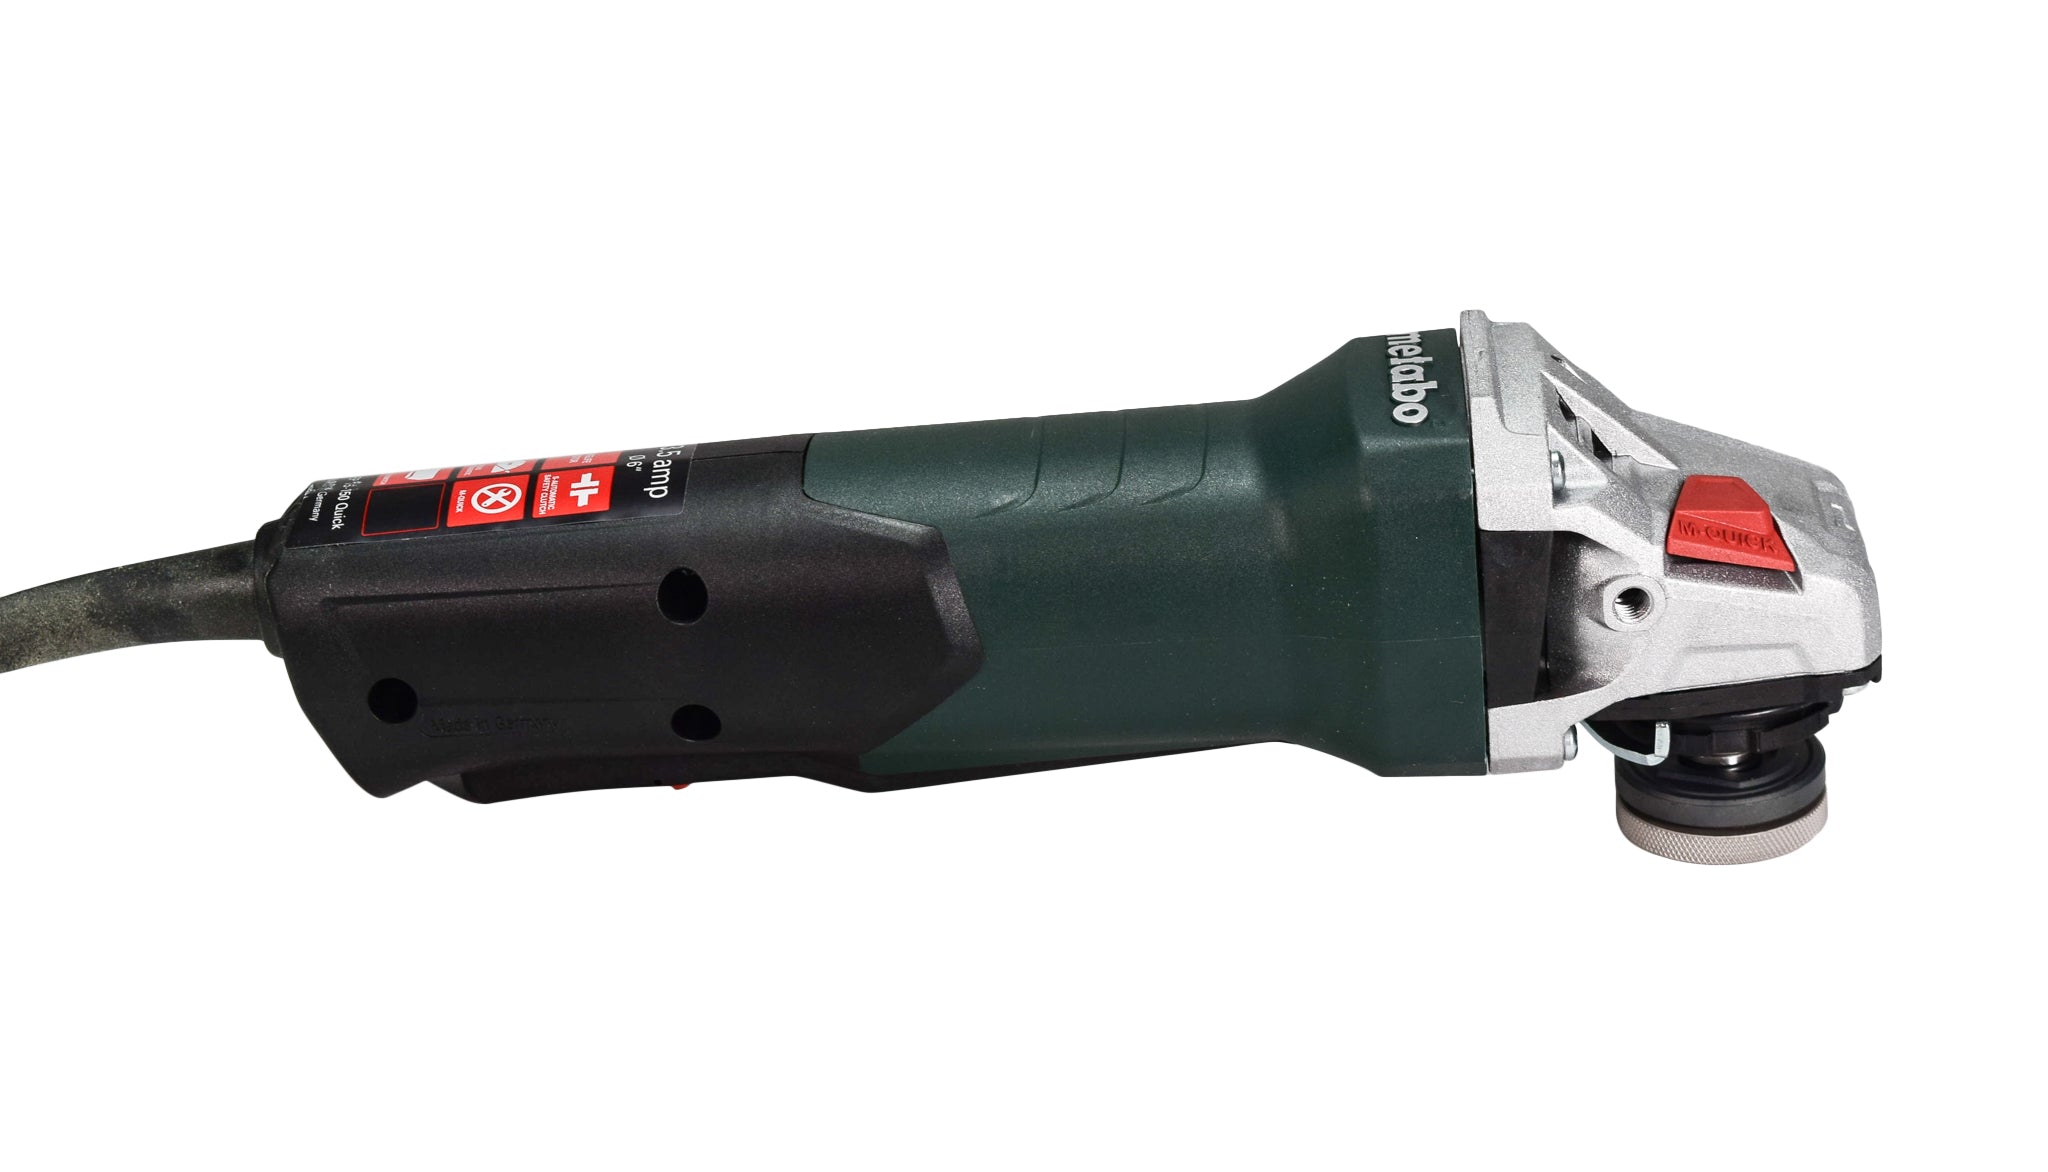 Metabo 600488420 WEP 15-150 Quick 6" Corded Angle Grinder 9,600 RPM 13.5 AMP (CLONE)